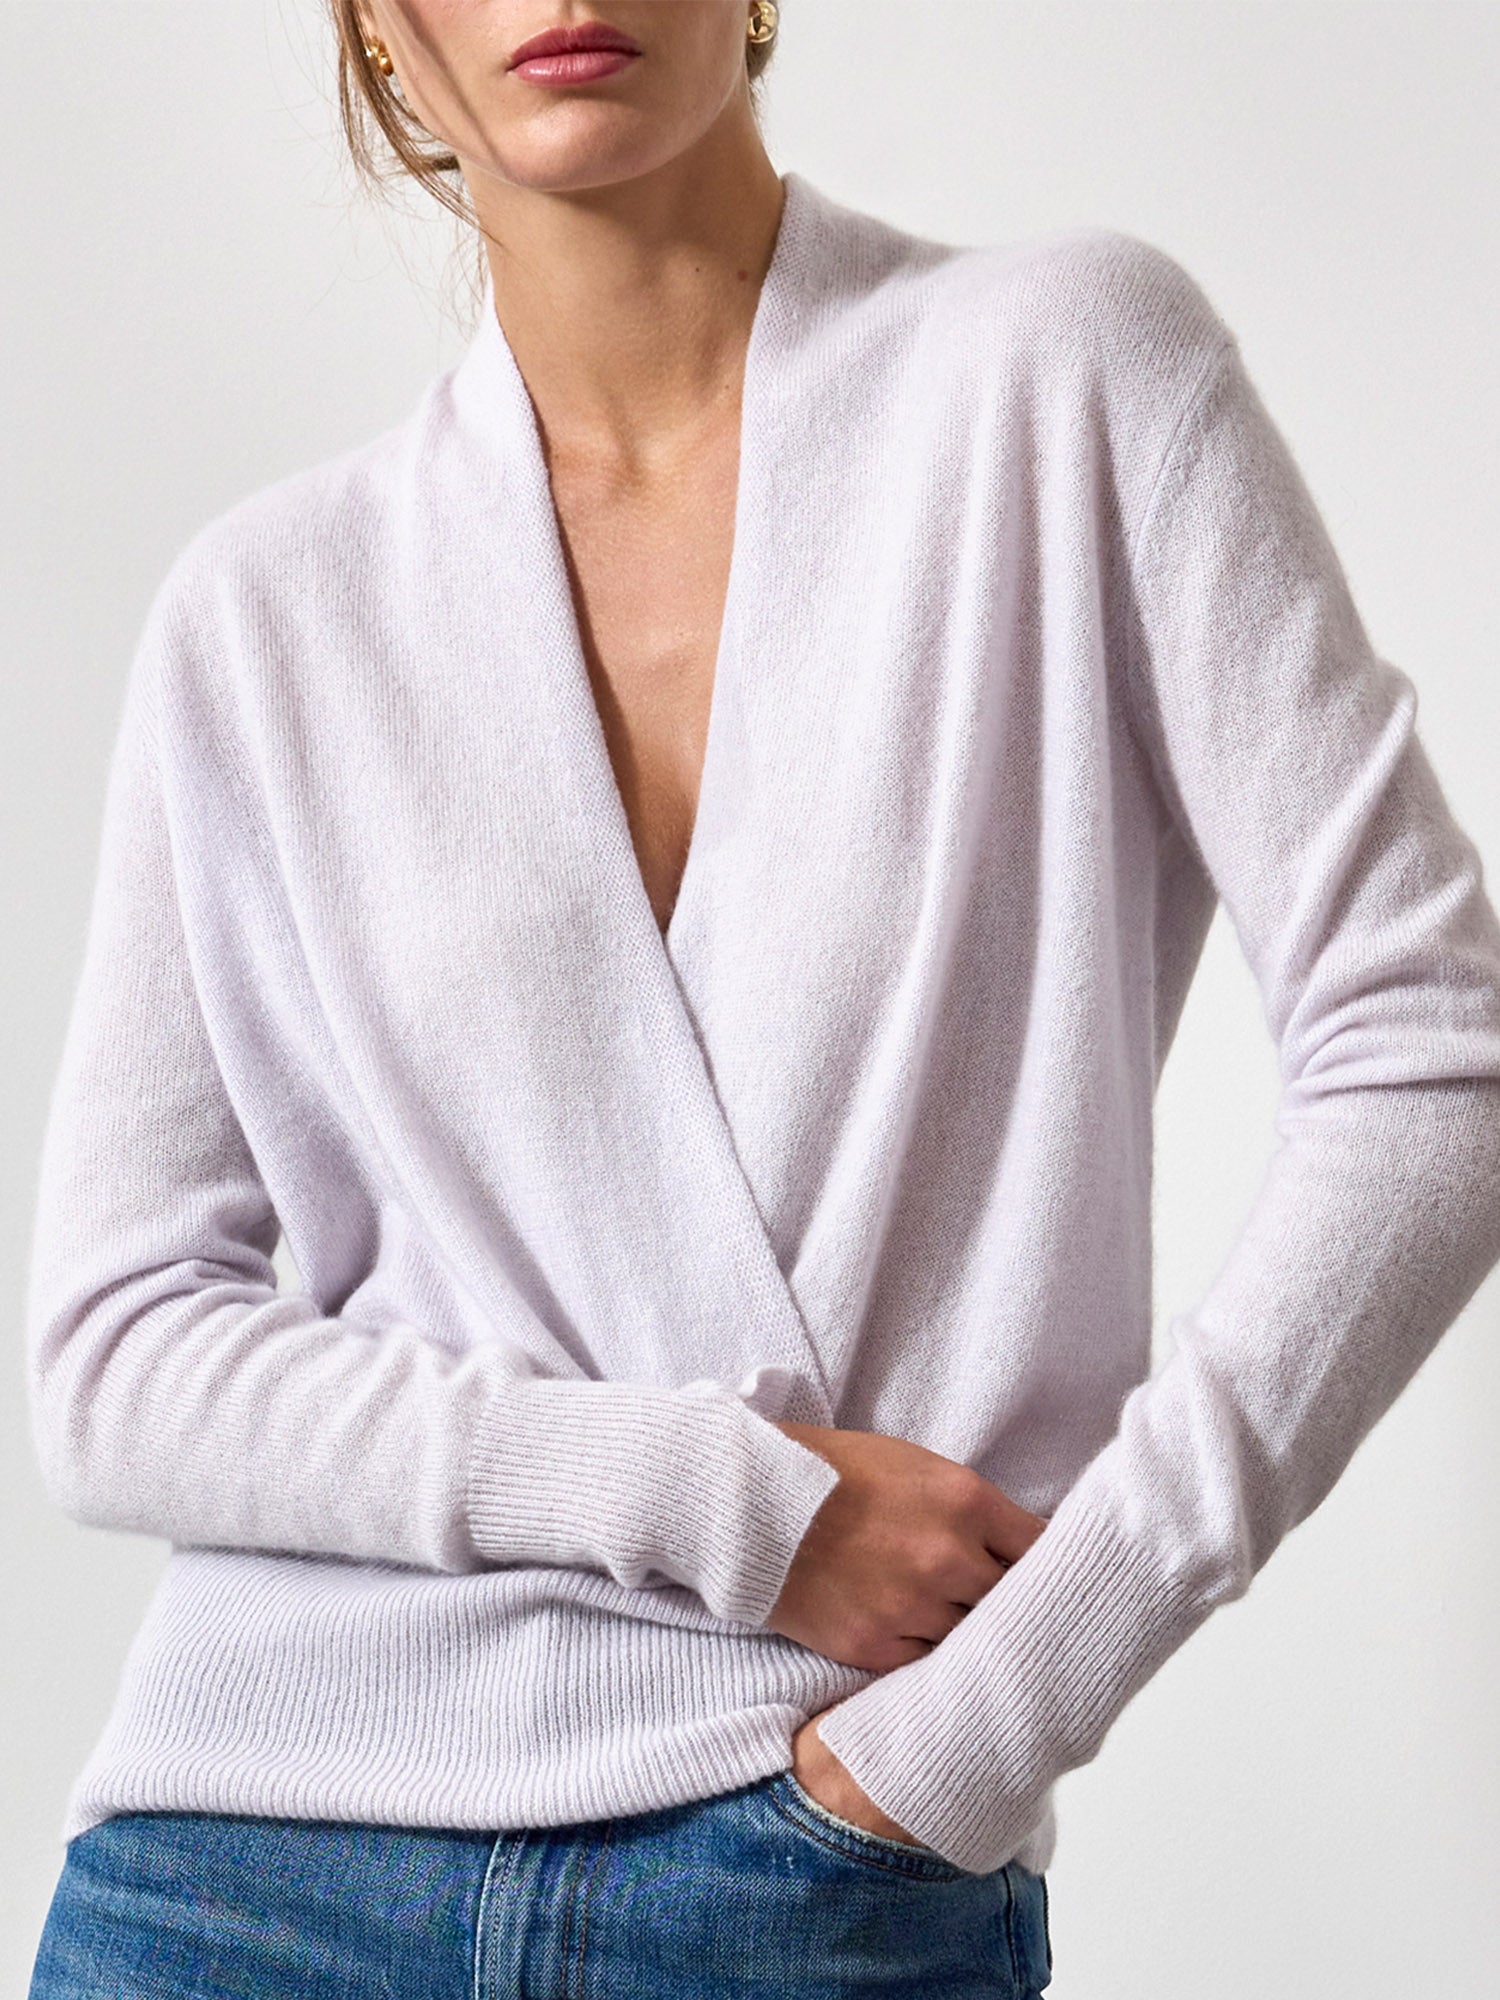 Phinneas cashmere v-neck white wrap sweater front view